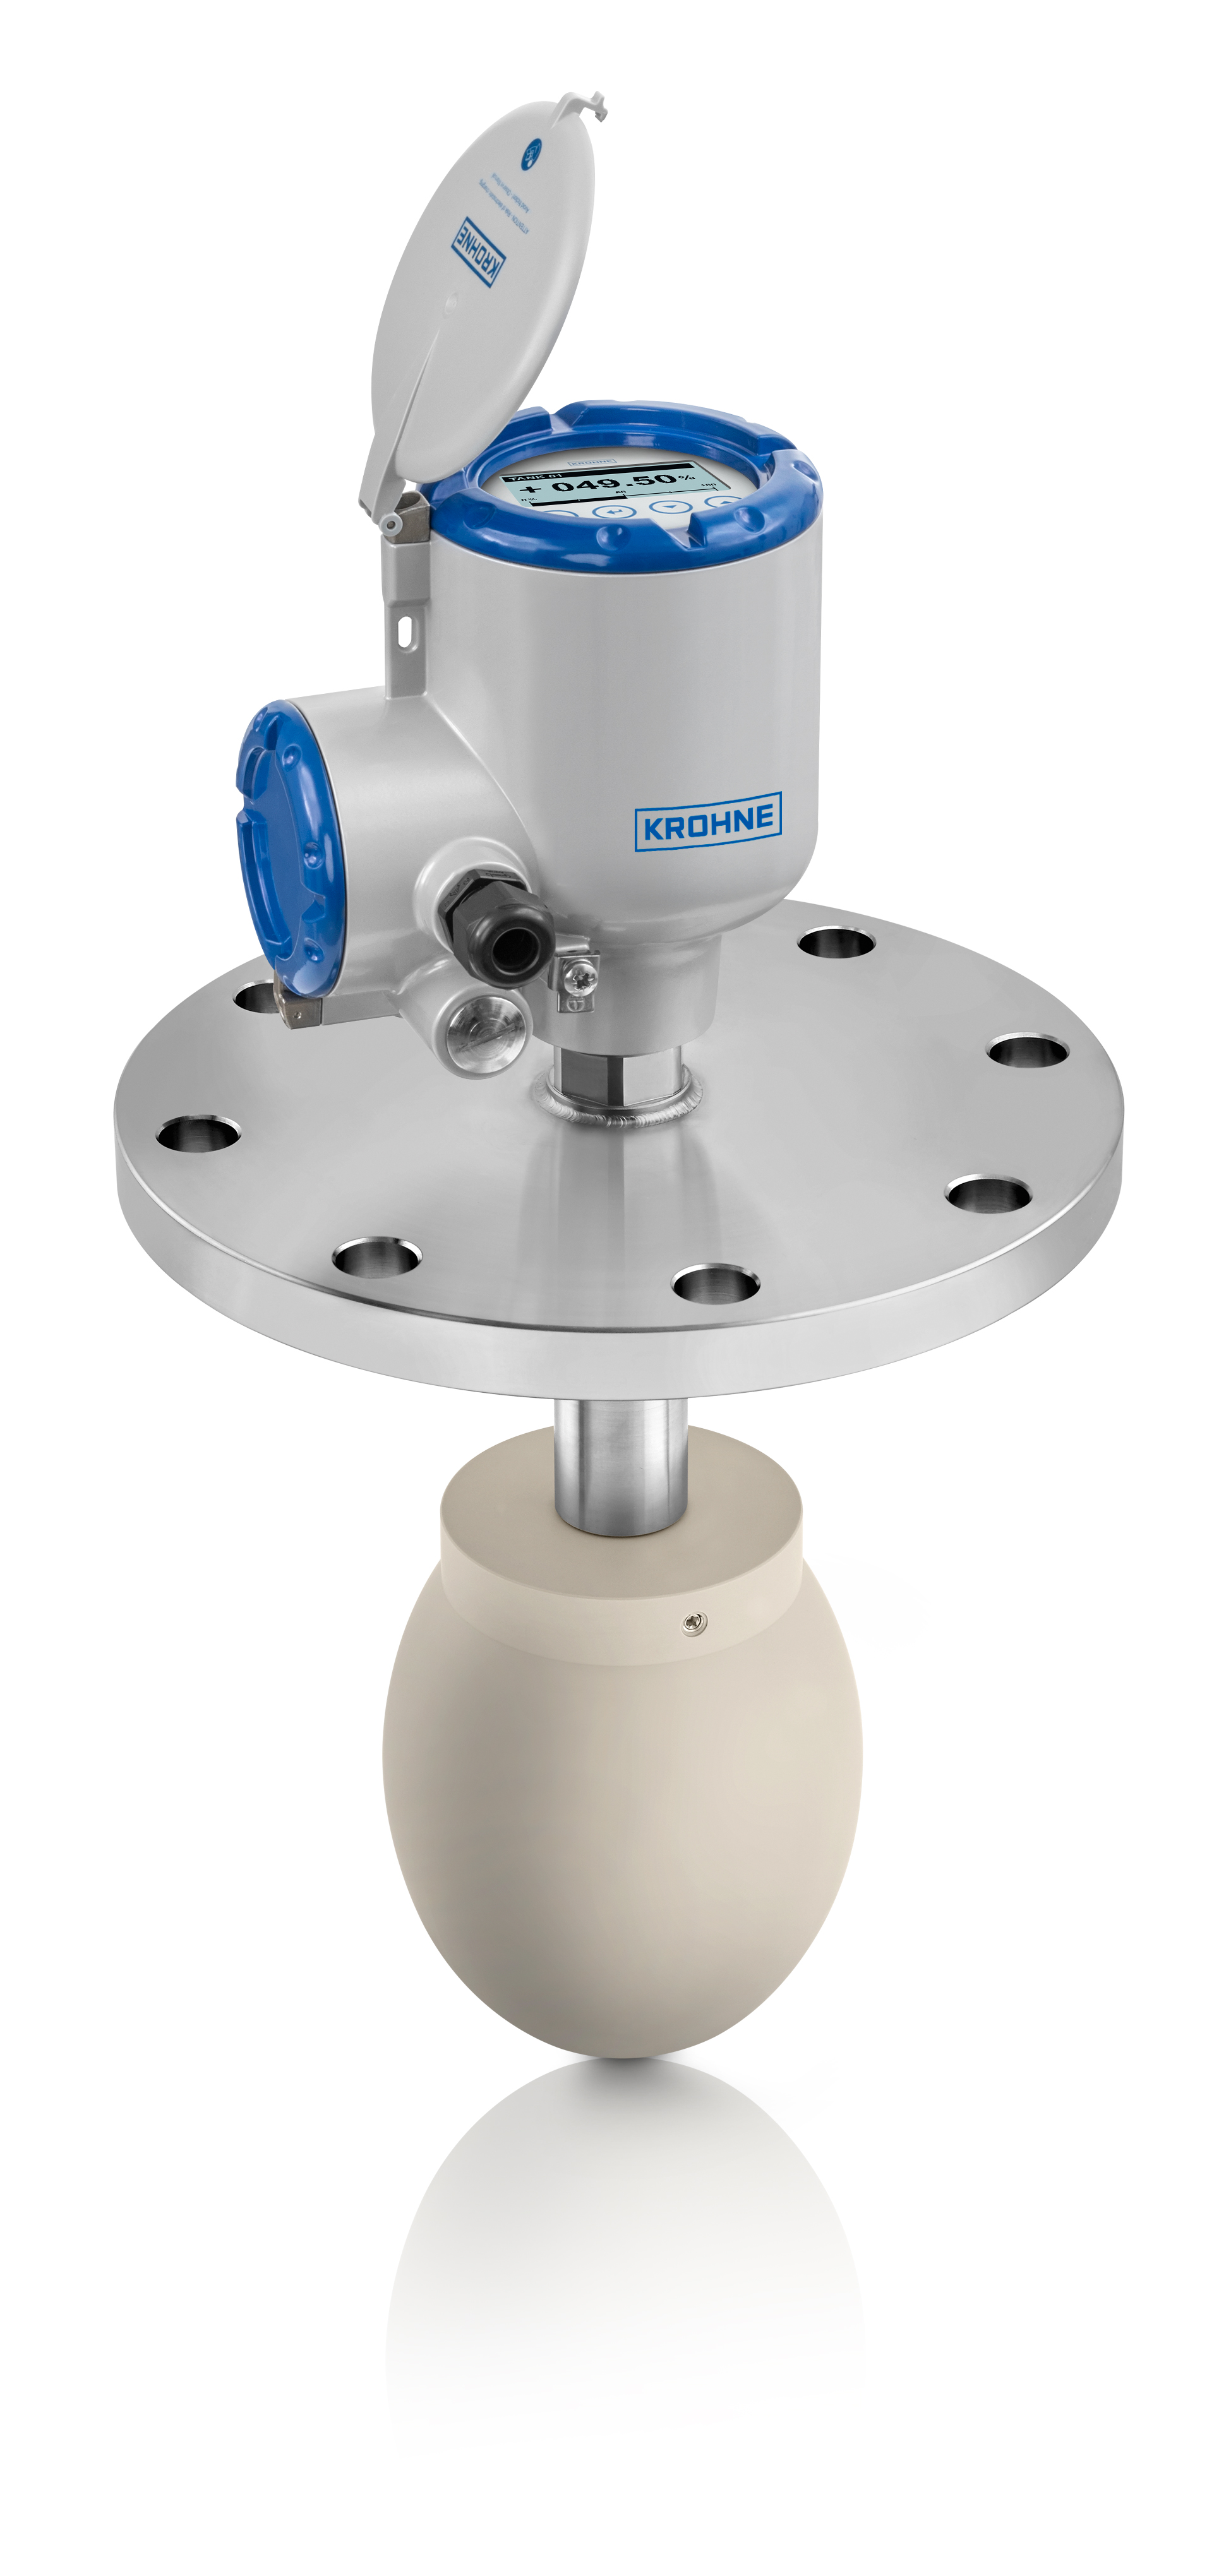 The Optiwave 5400 radar level transmitter offers accurate level measurement of liquids and solids.